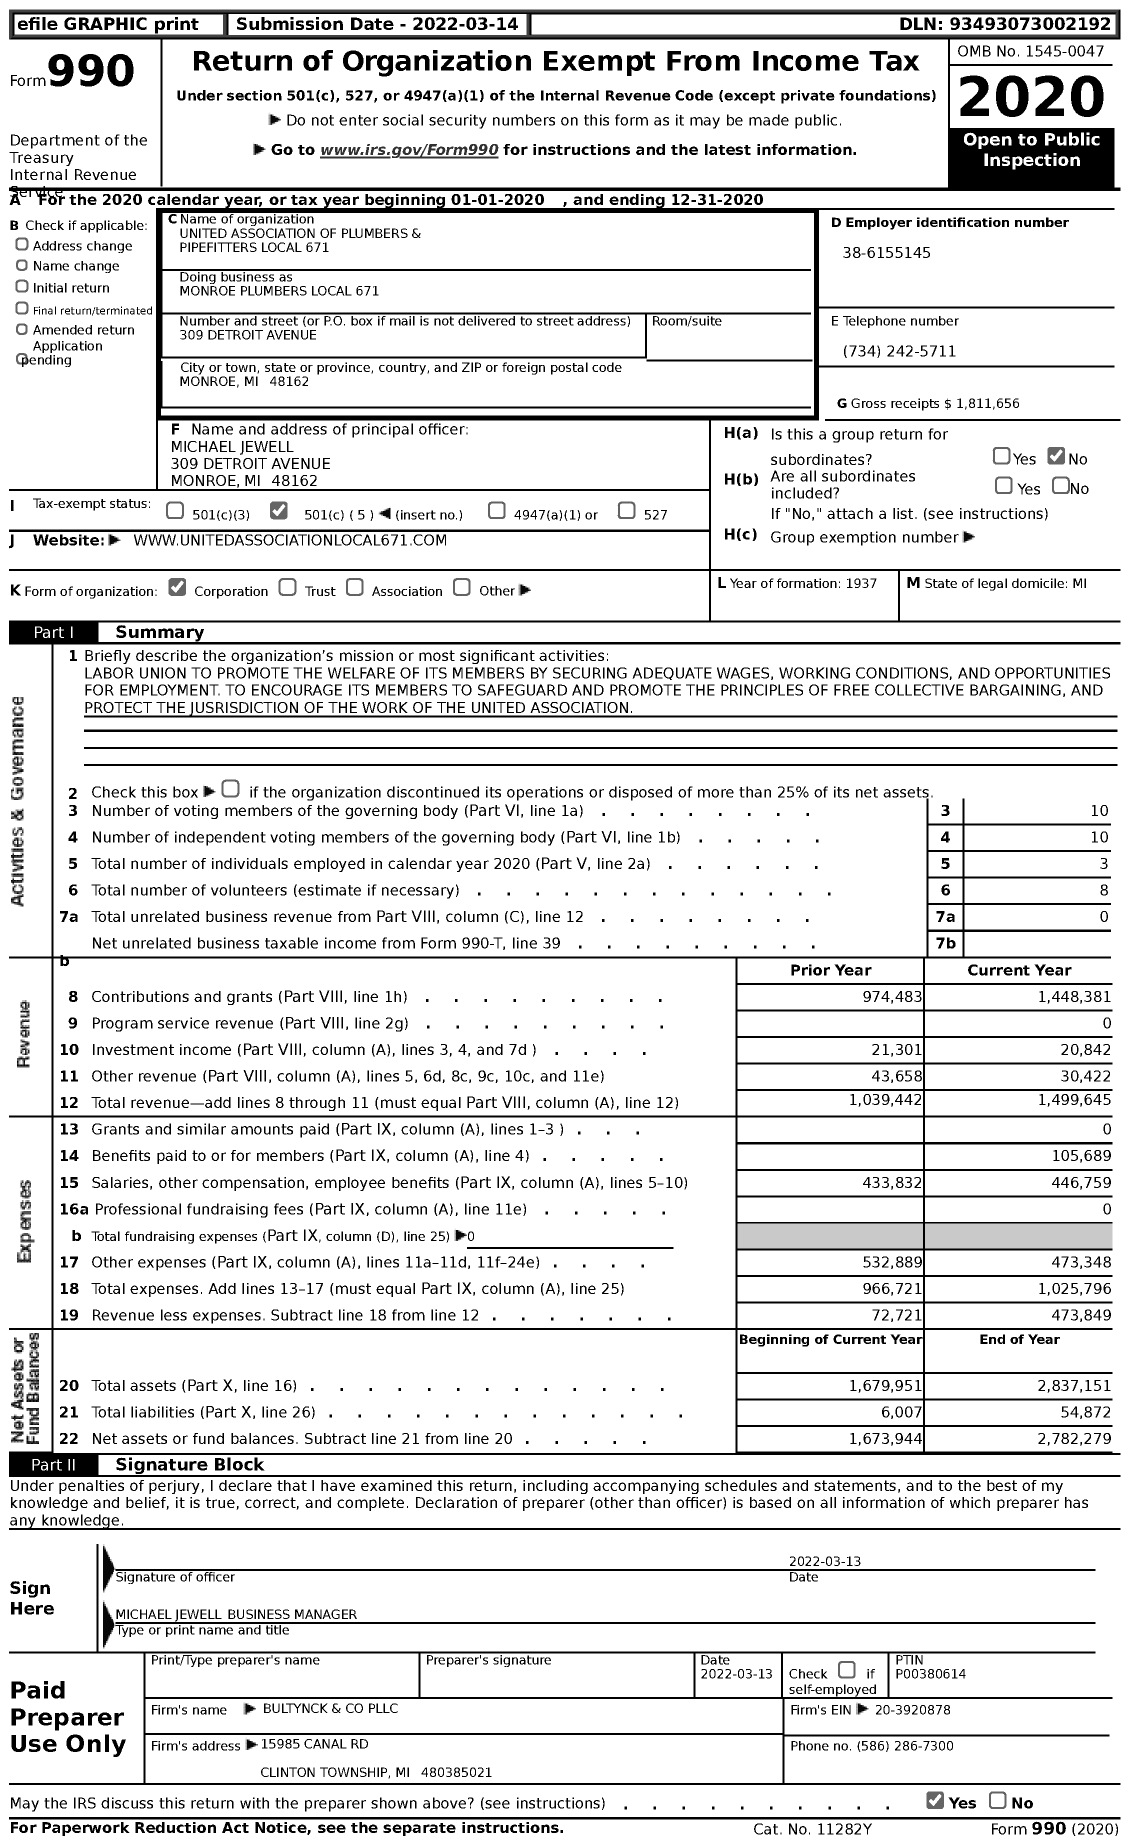 Image of first page of 2020 Form 990 for United Association of Plumbers and Pipefitters Local 671